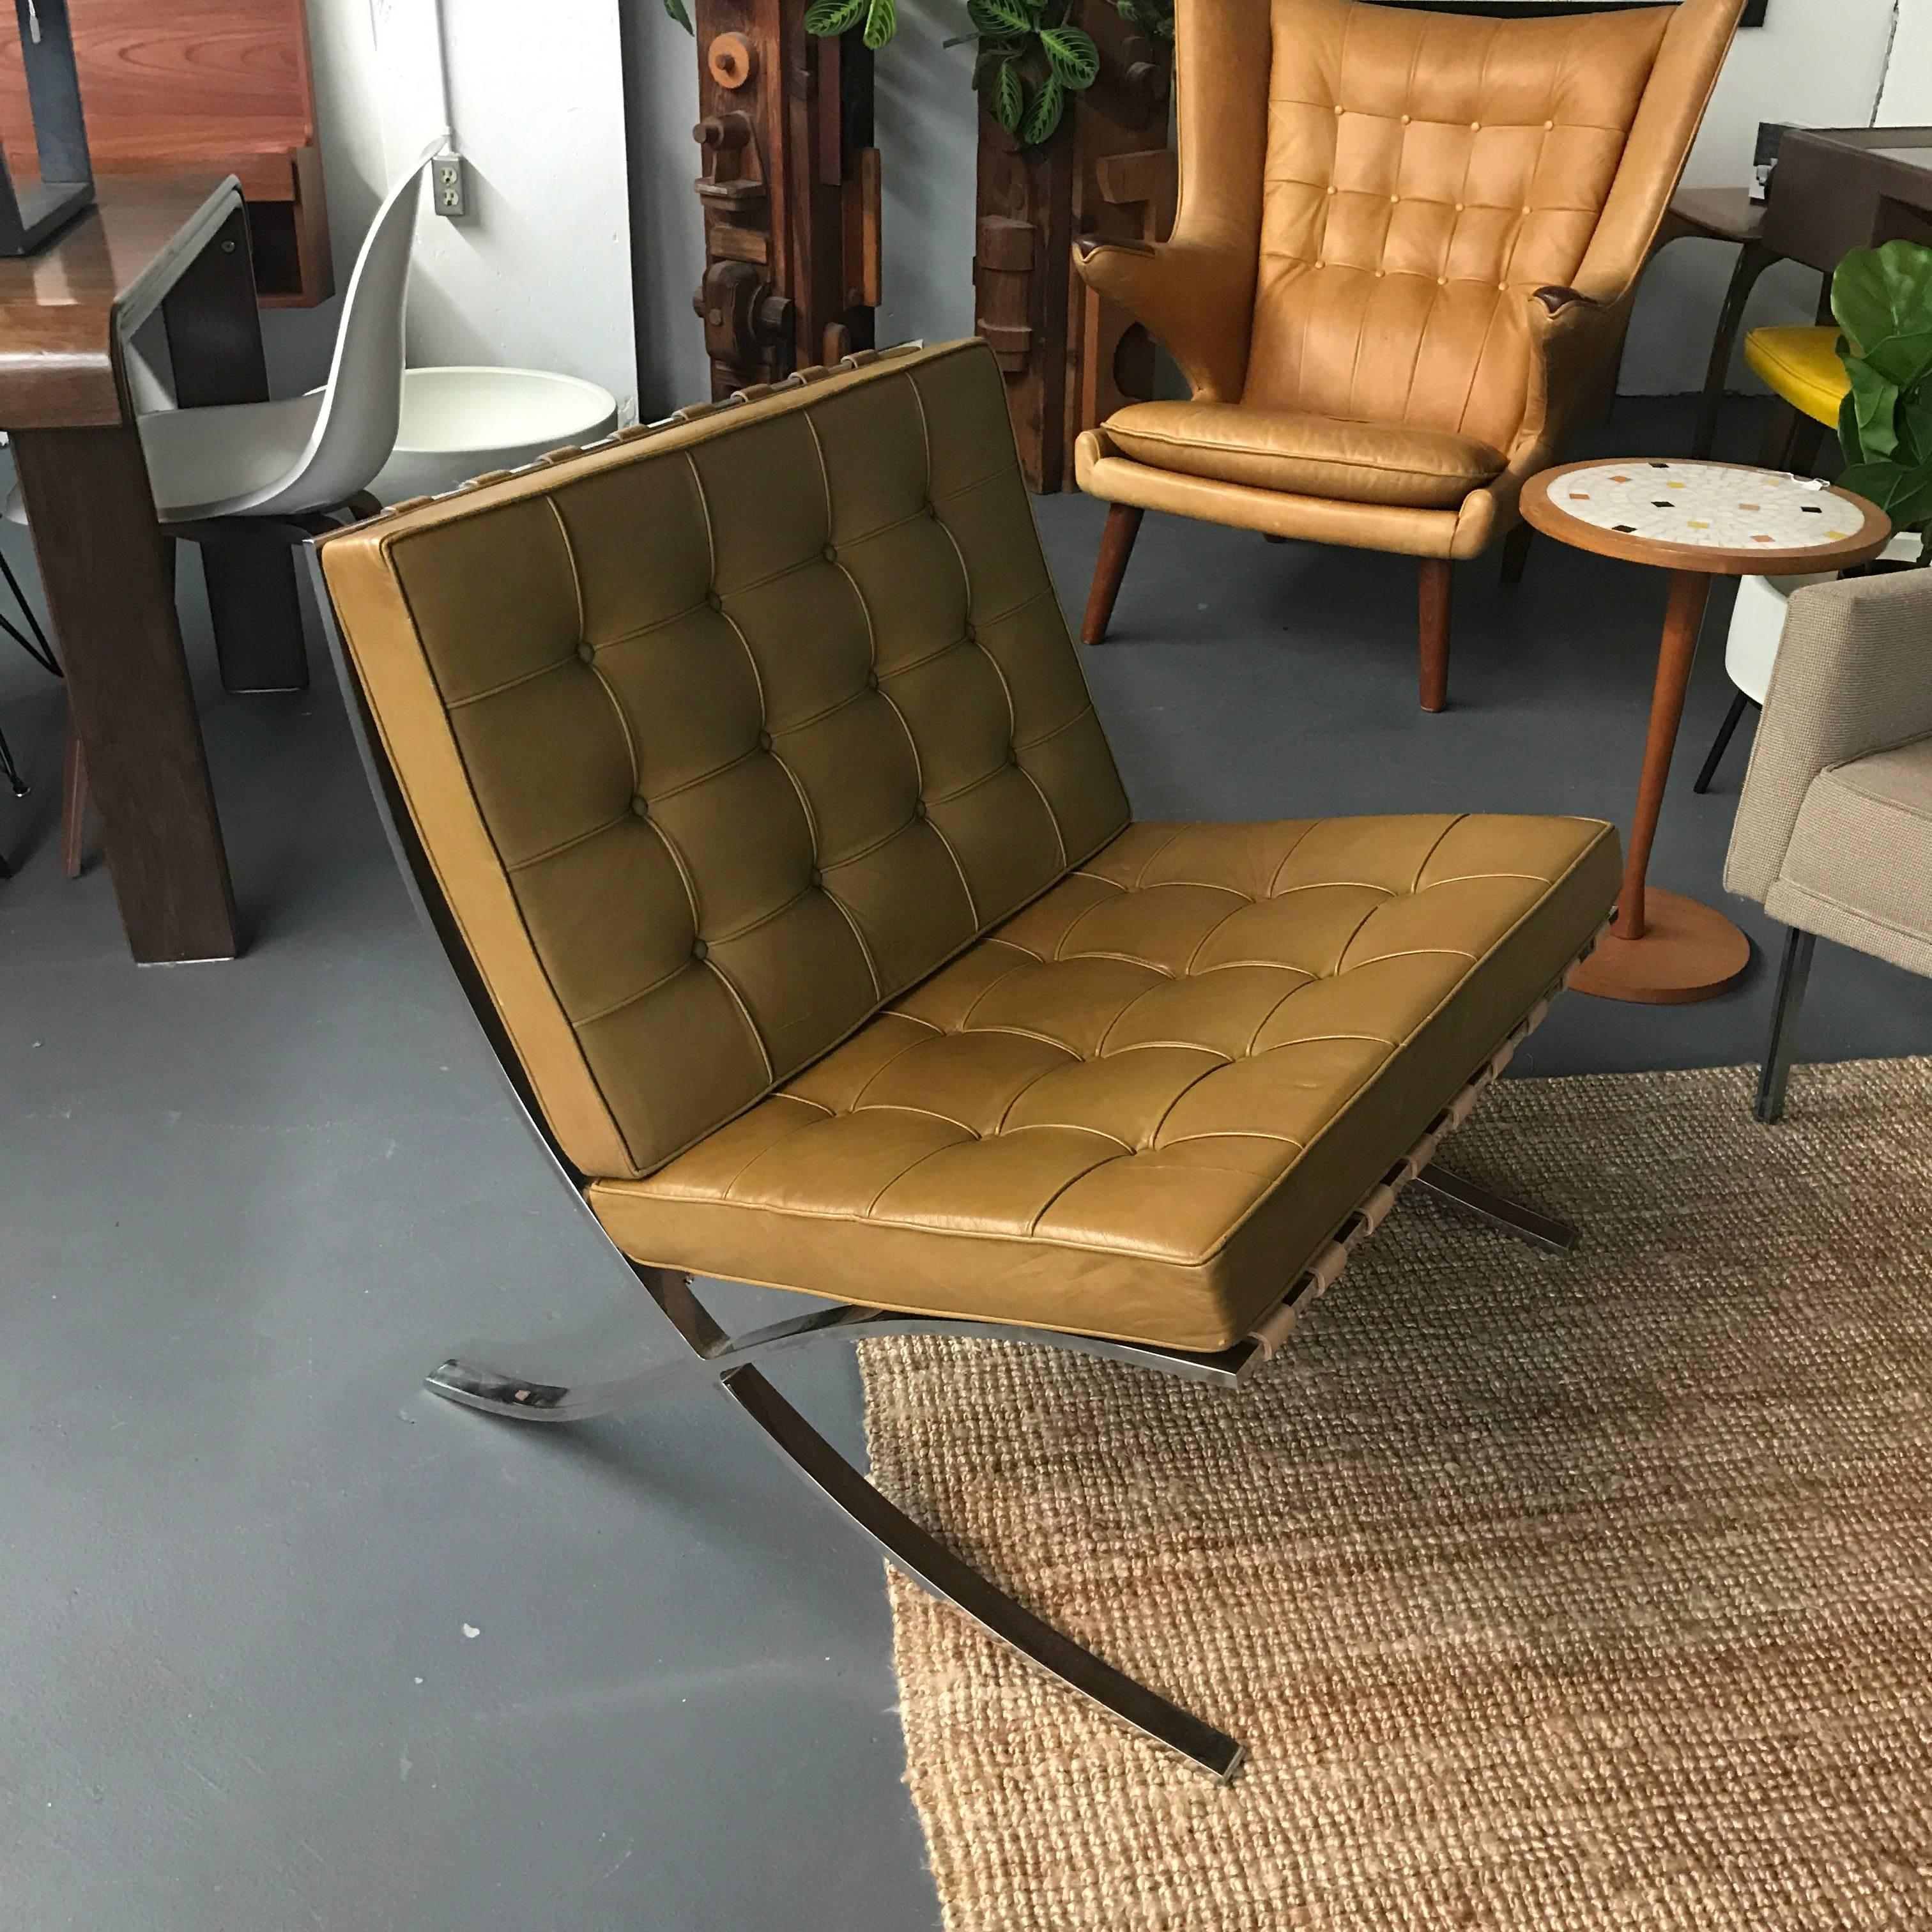 Early vintage original authentic Mies van der Rohe Barcelona chairs for Knoll. Great vintage condition
wear consistent with age and use.